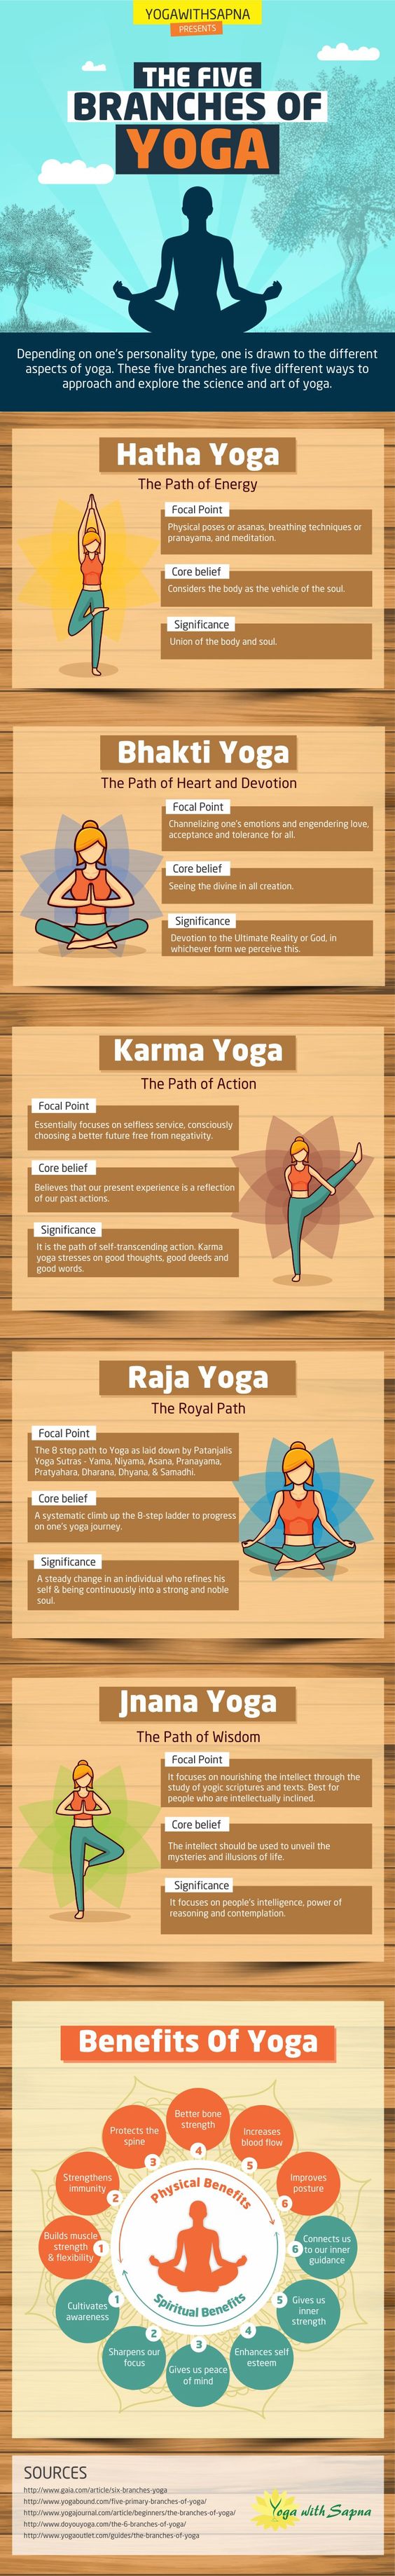 The Five Traditional Branches of Yoga [Infographic]